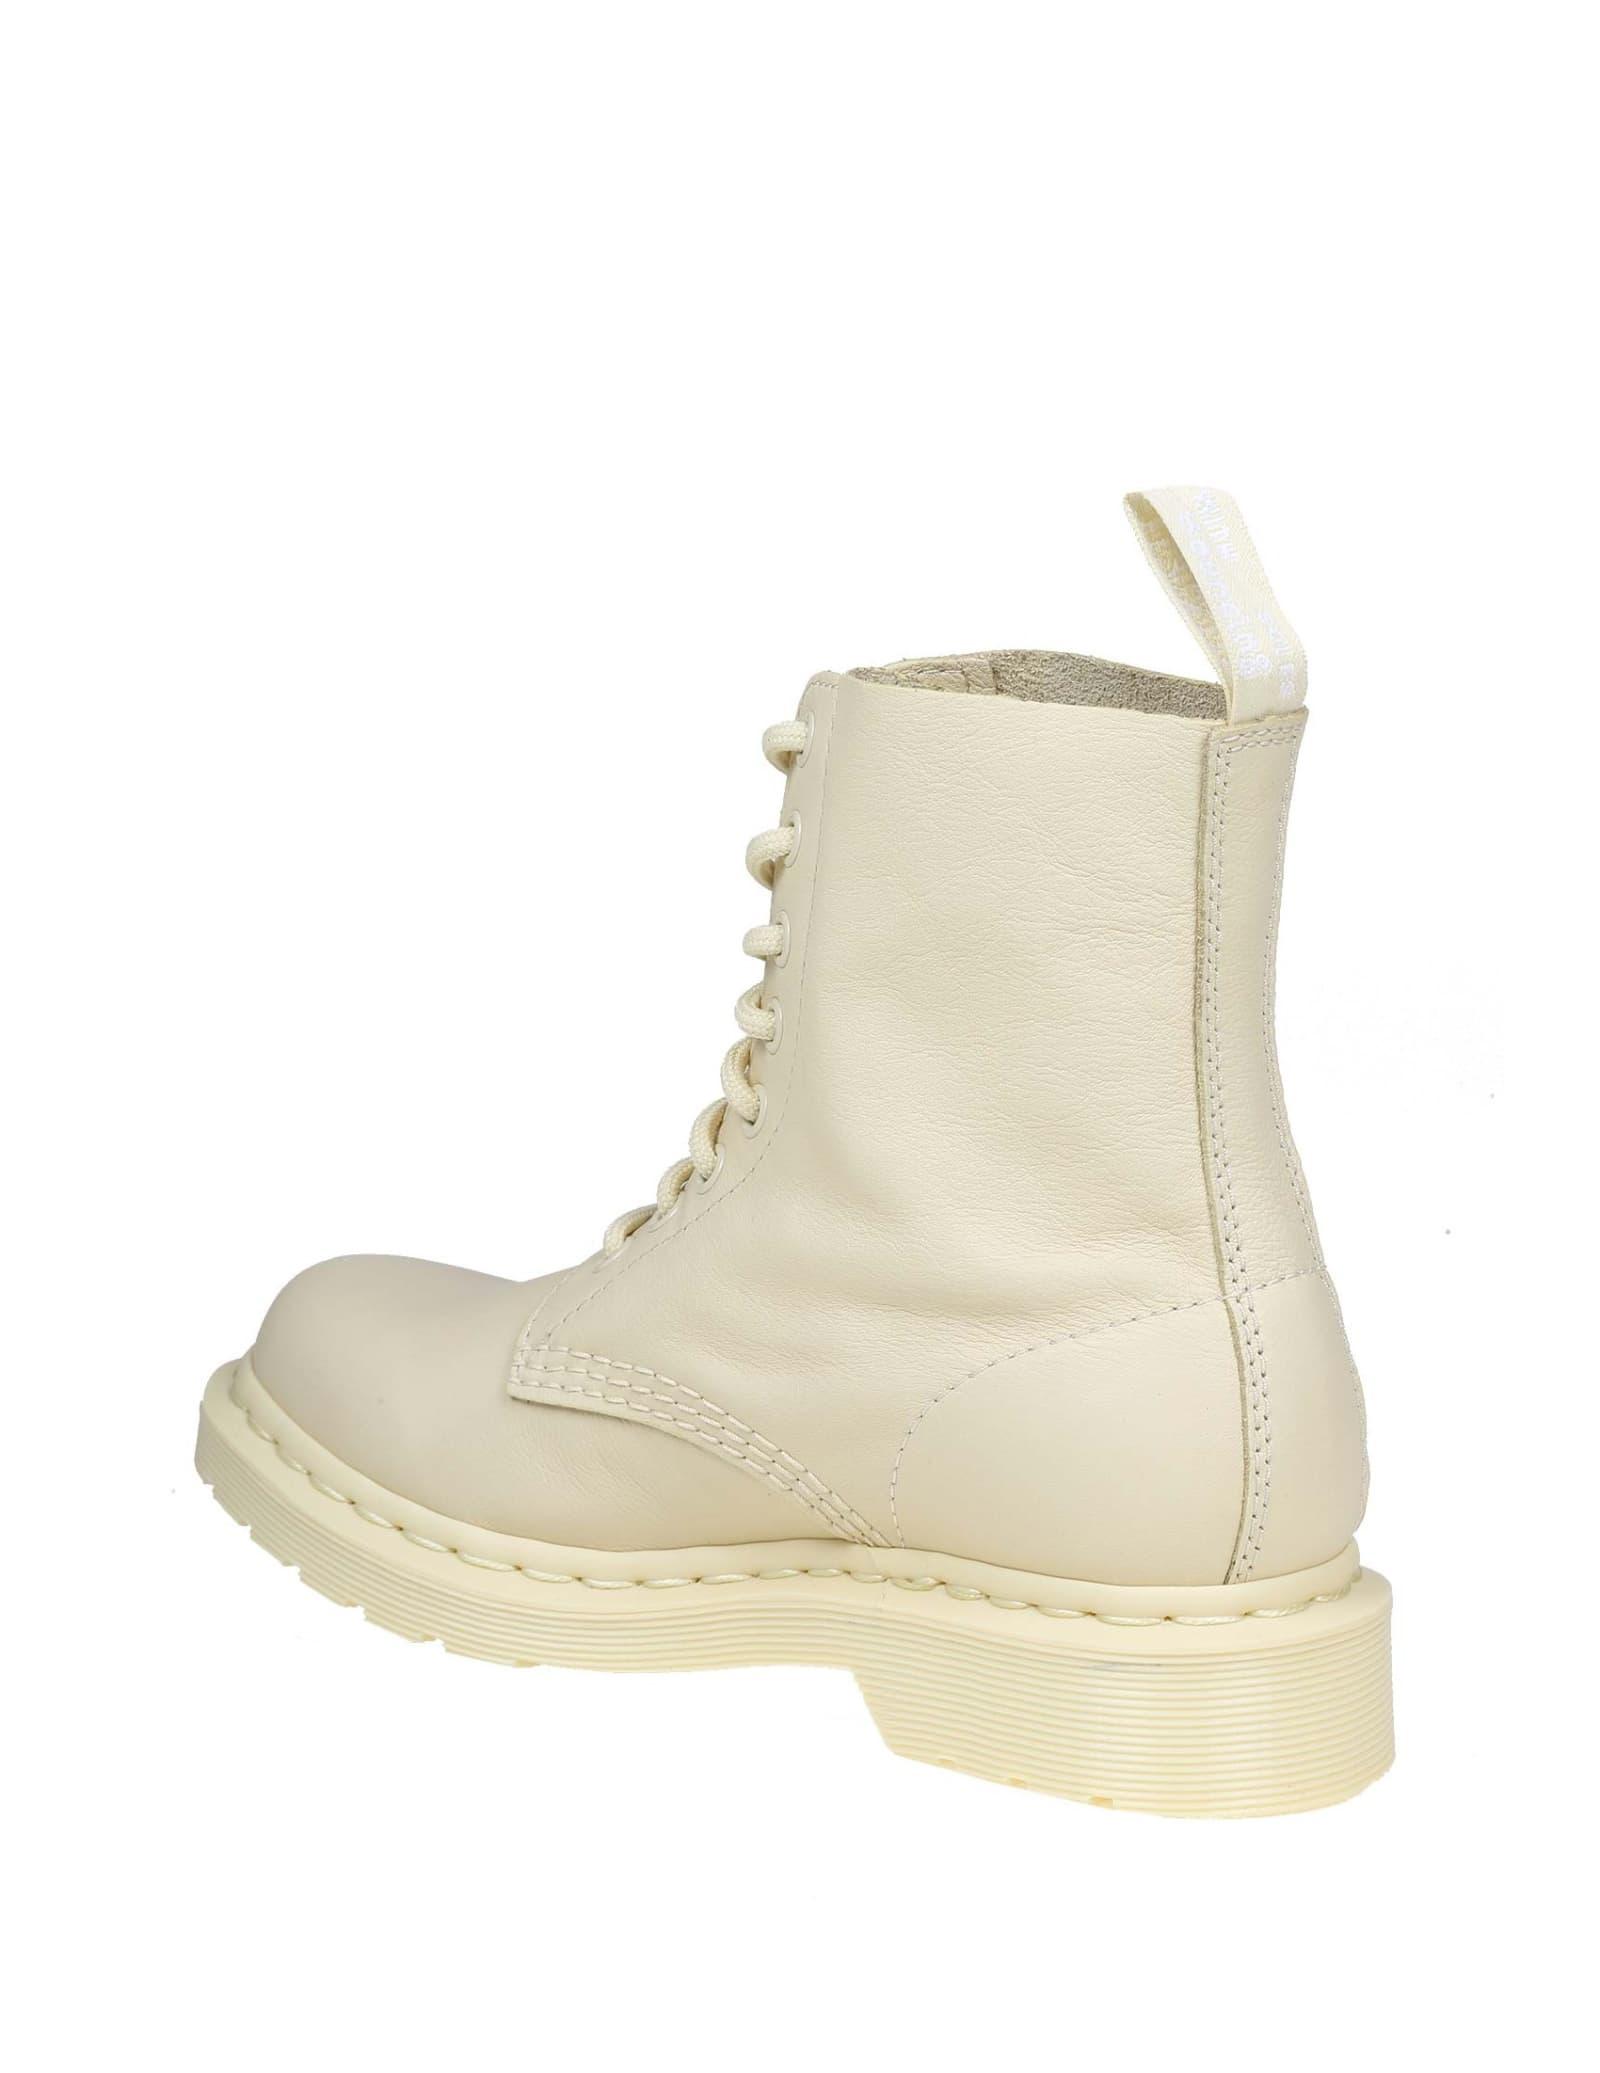 Dr. Martens 1460 Pascal Mono In Leather in Natural | Lyst